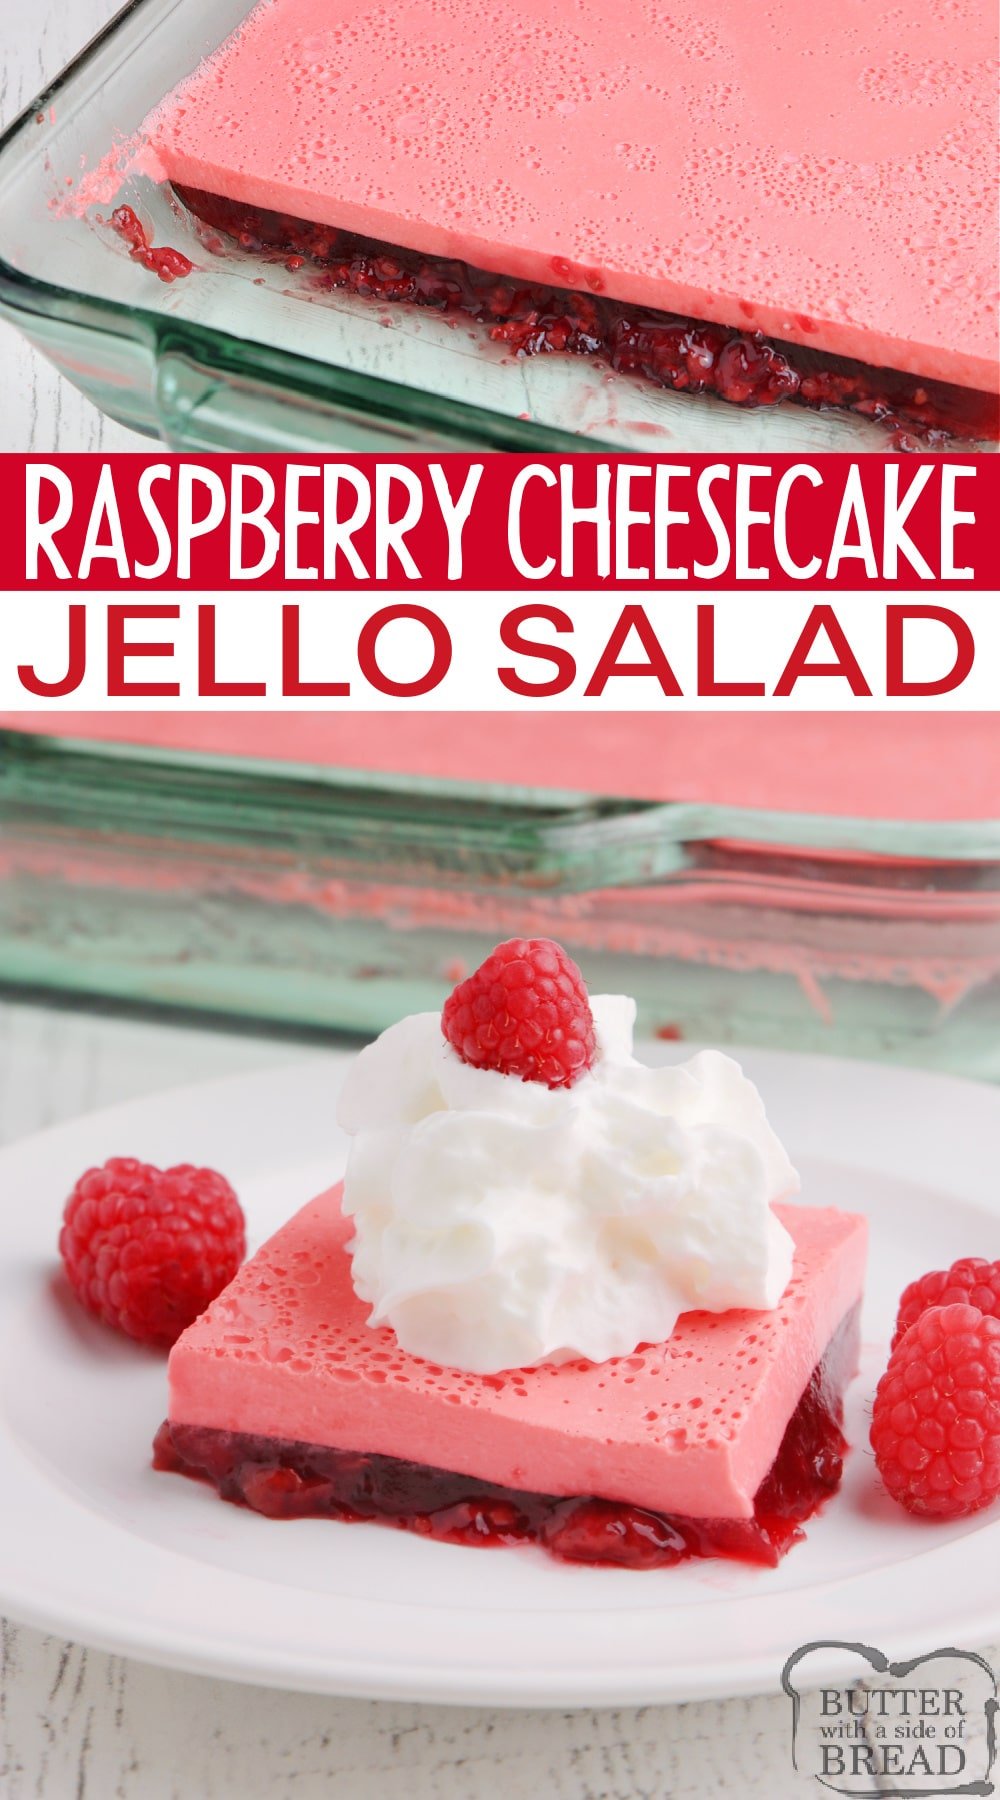 Raspberry Cheesecake Jello made with only 4 ingredients for a delicious side dish or dessert. This Jello recipe is made with cream cheese, yogurt and pie filling and can be made in any flavor you want!